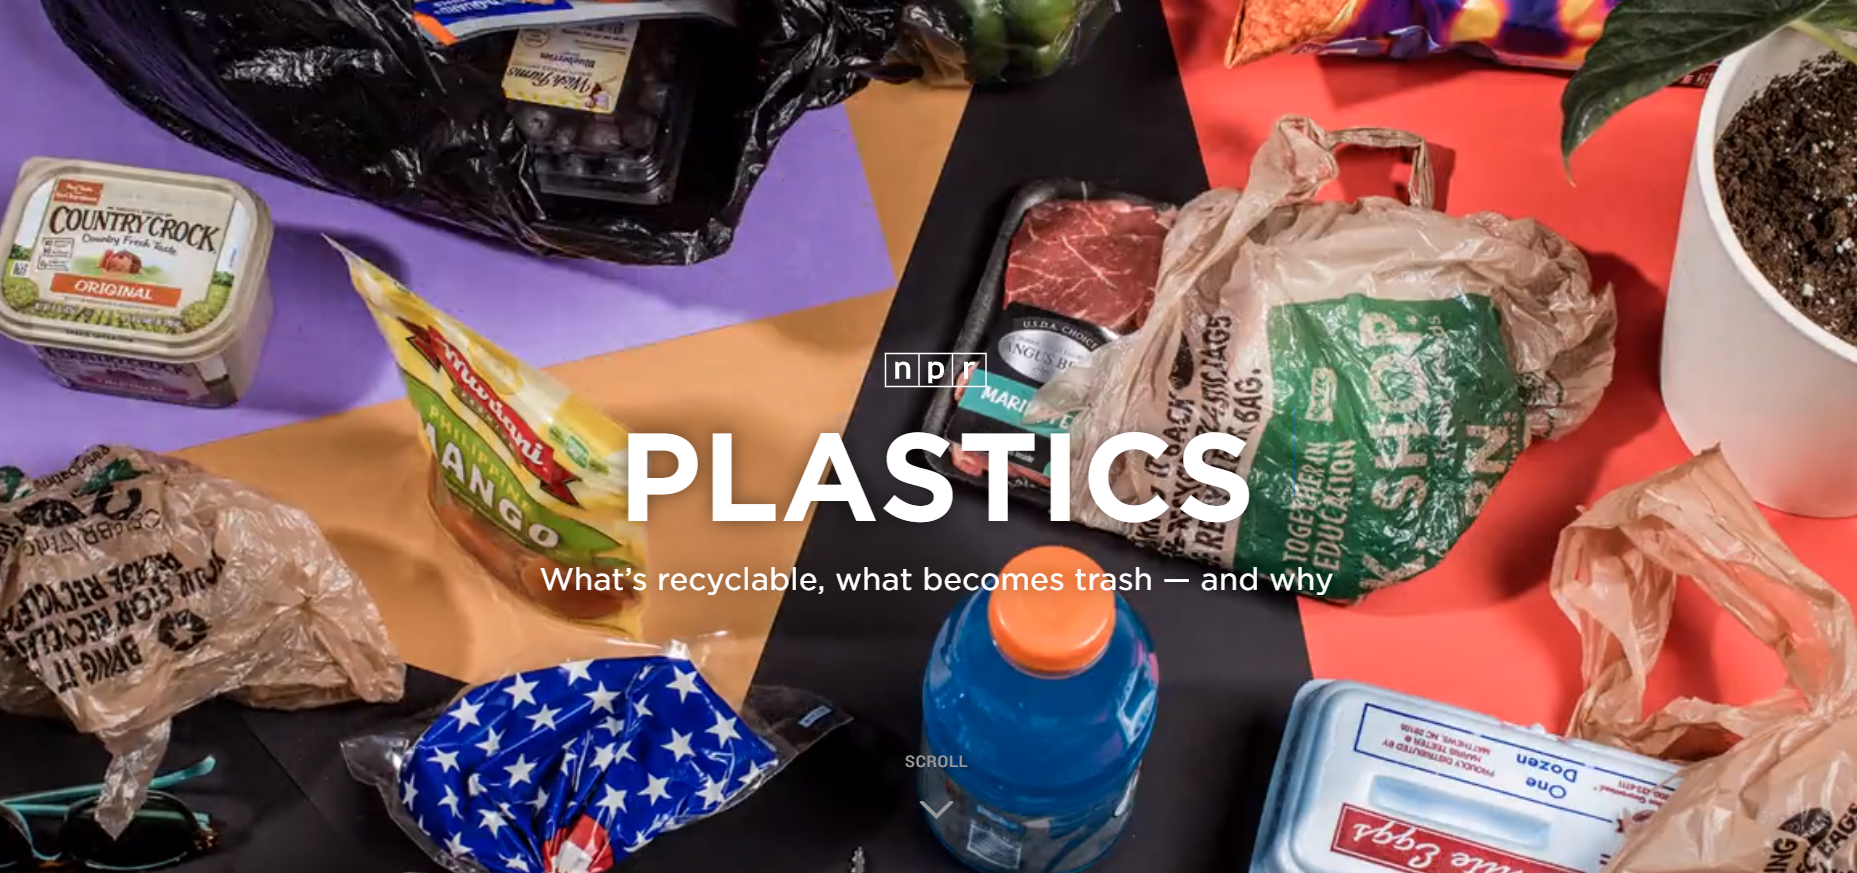 PLASTICS What’s recyclable, what becomes trash — and why